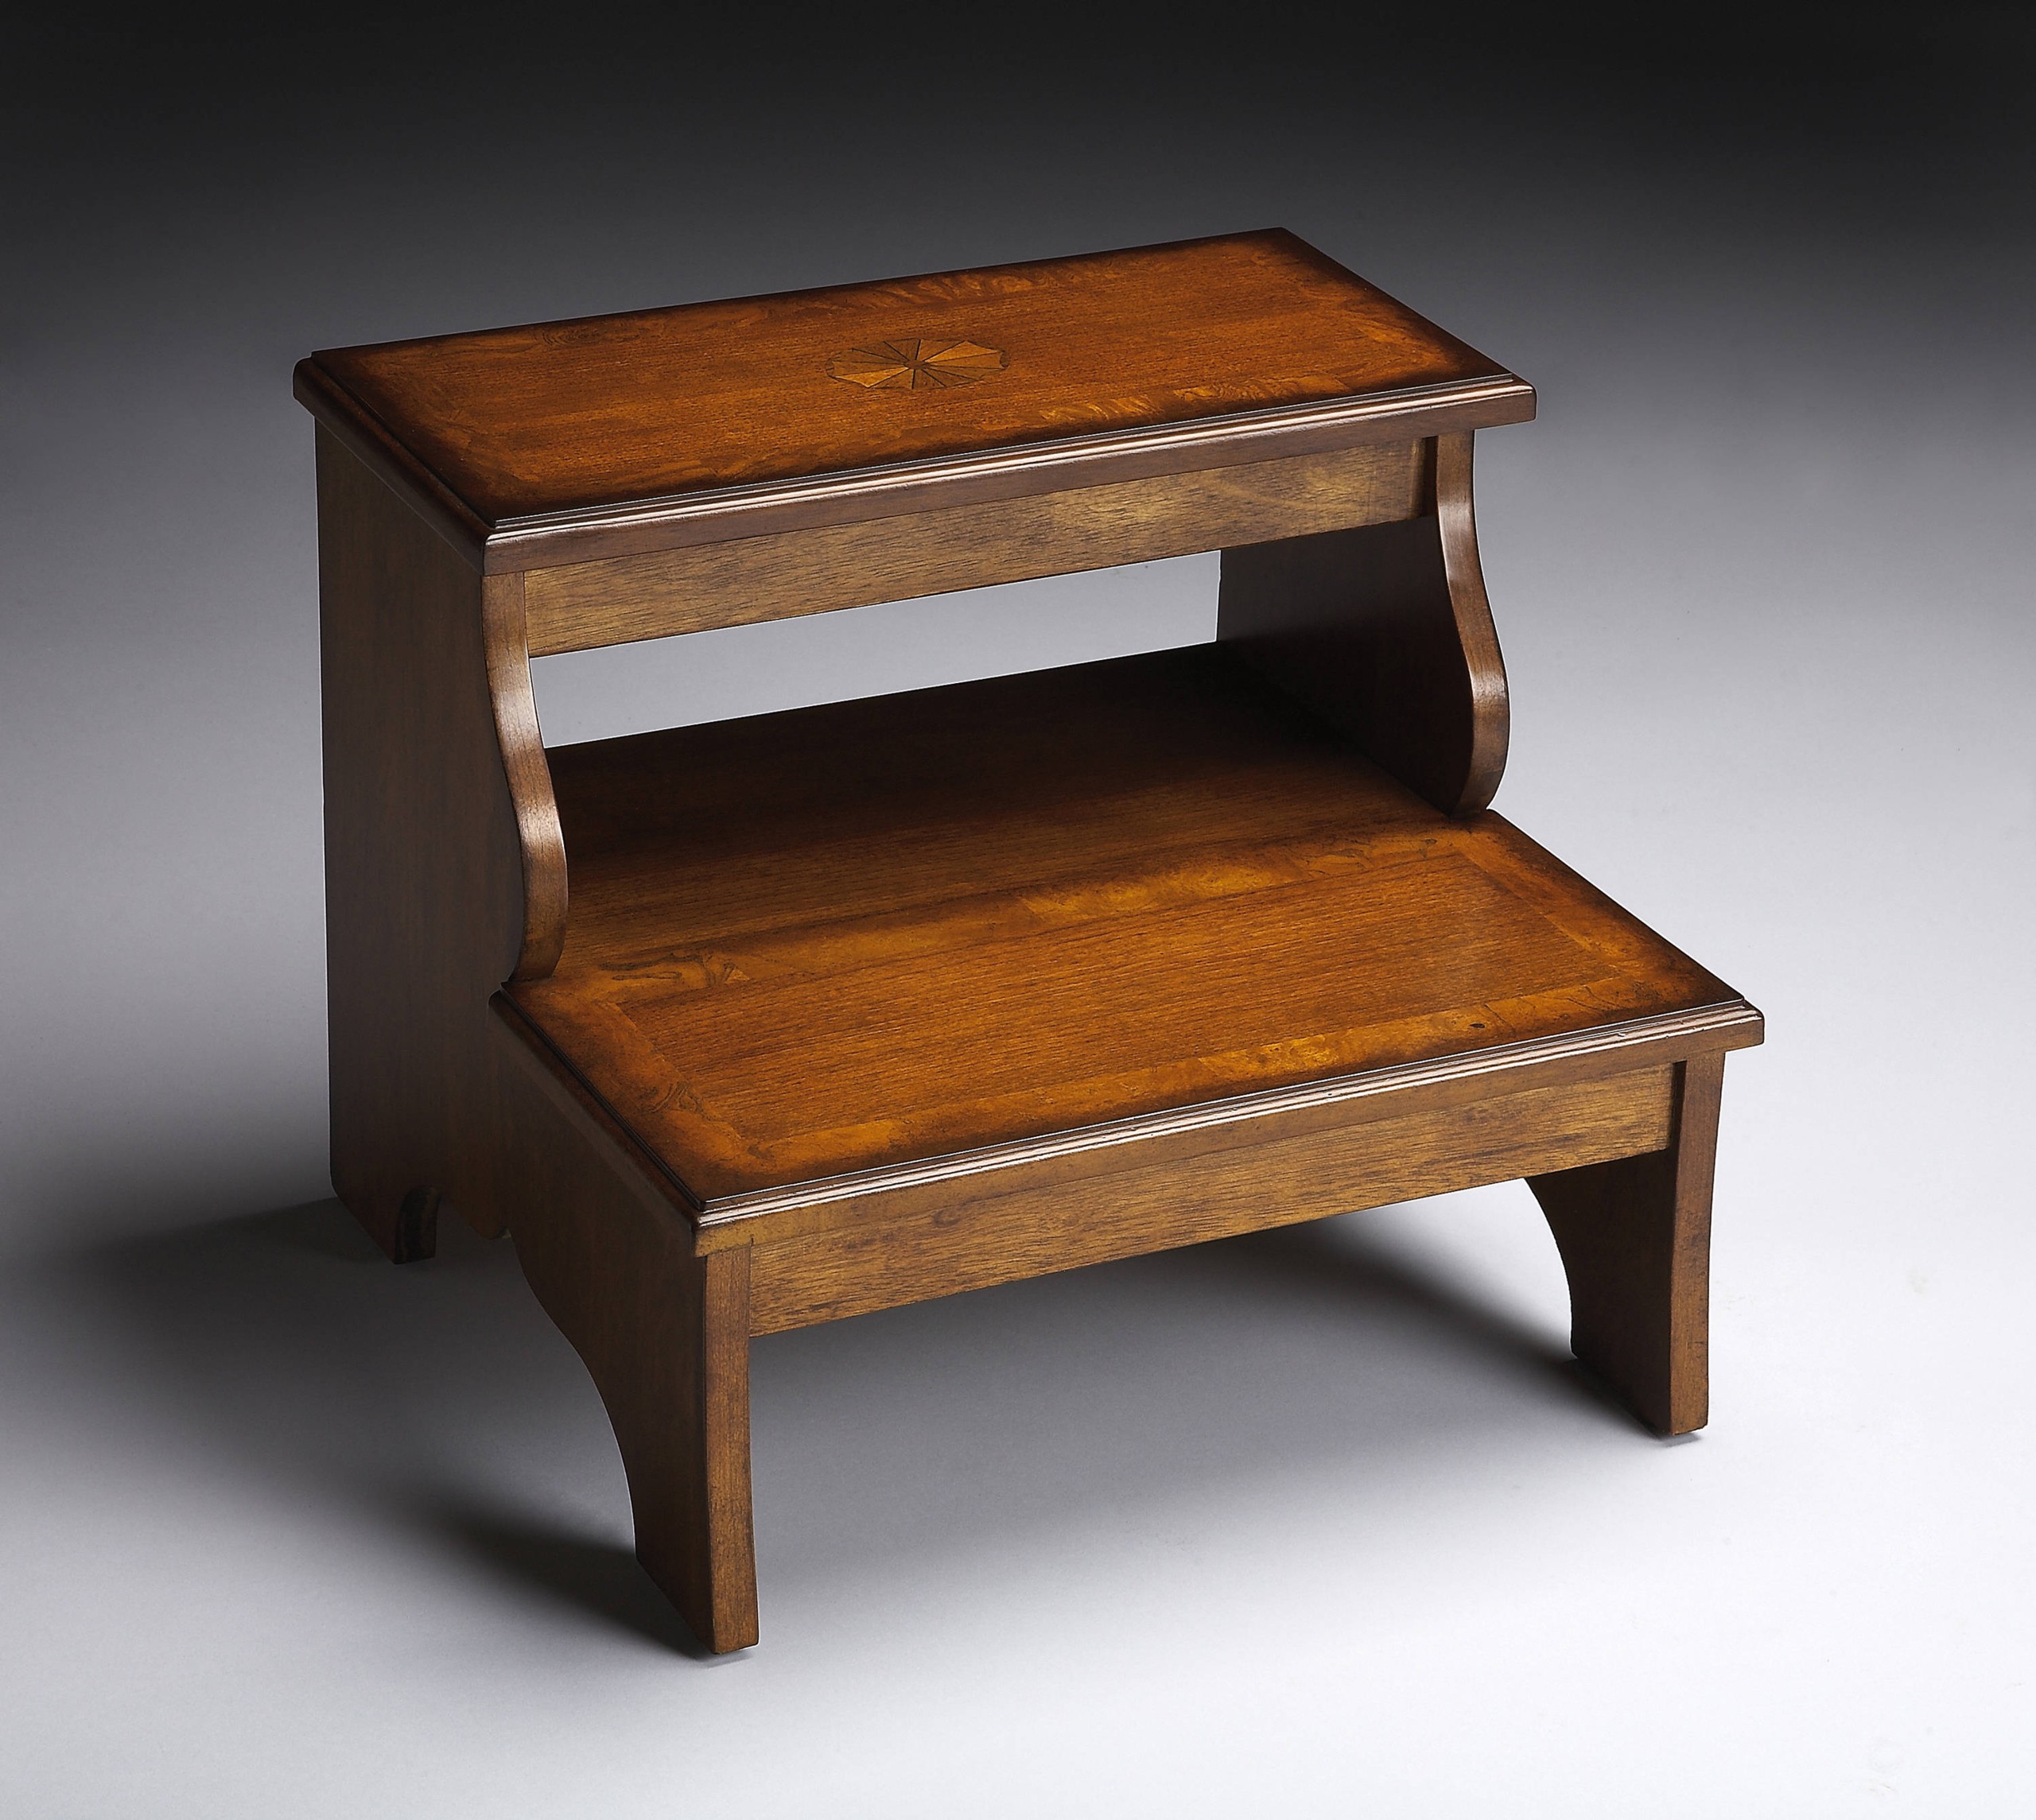 Stratford Hills Inlaid Step Stool - Two Step Bed Step - Accent Furniture